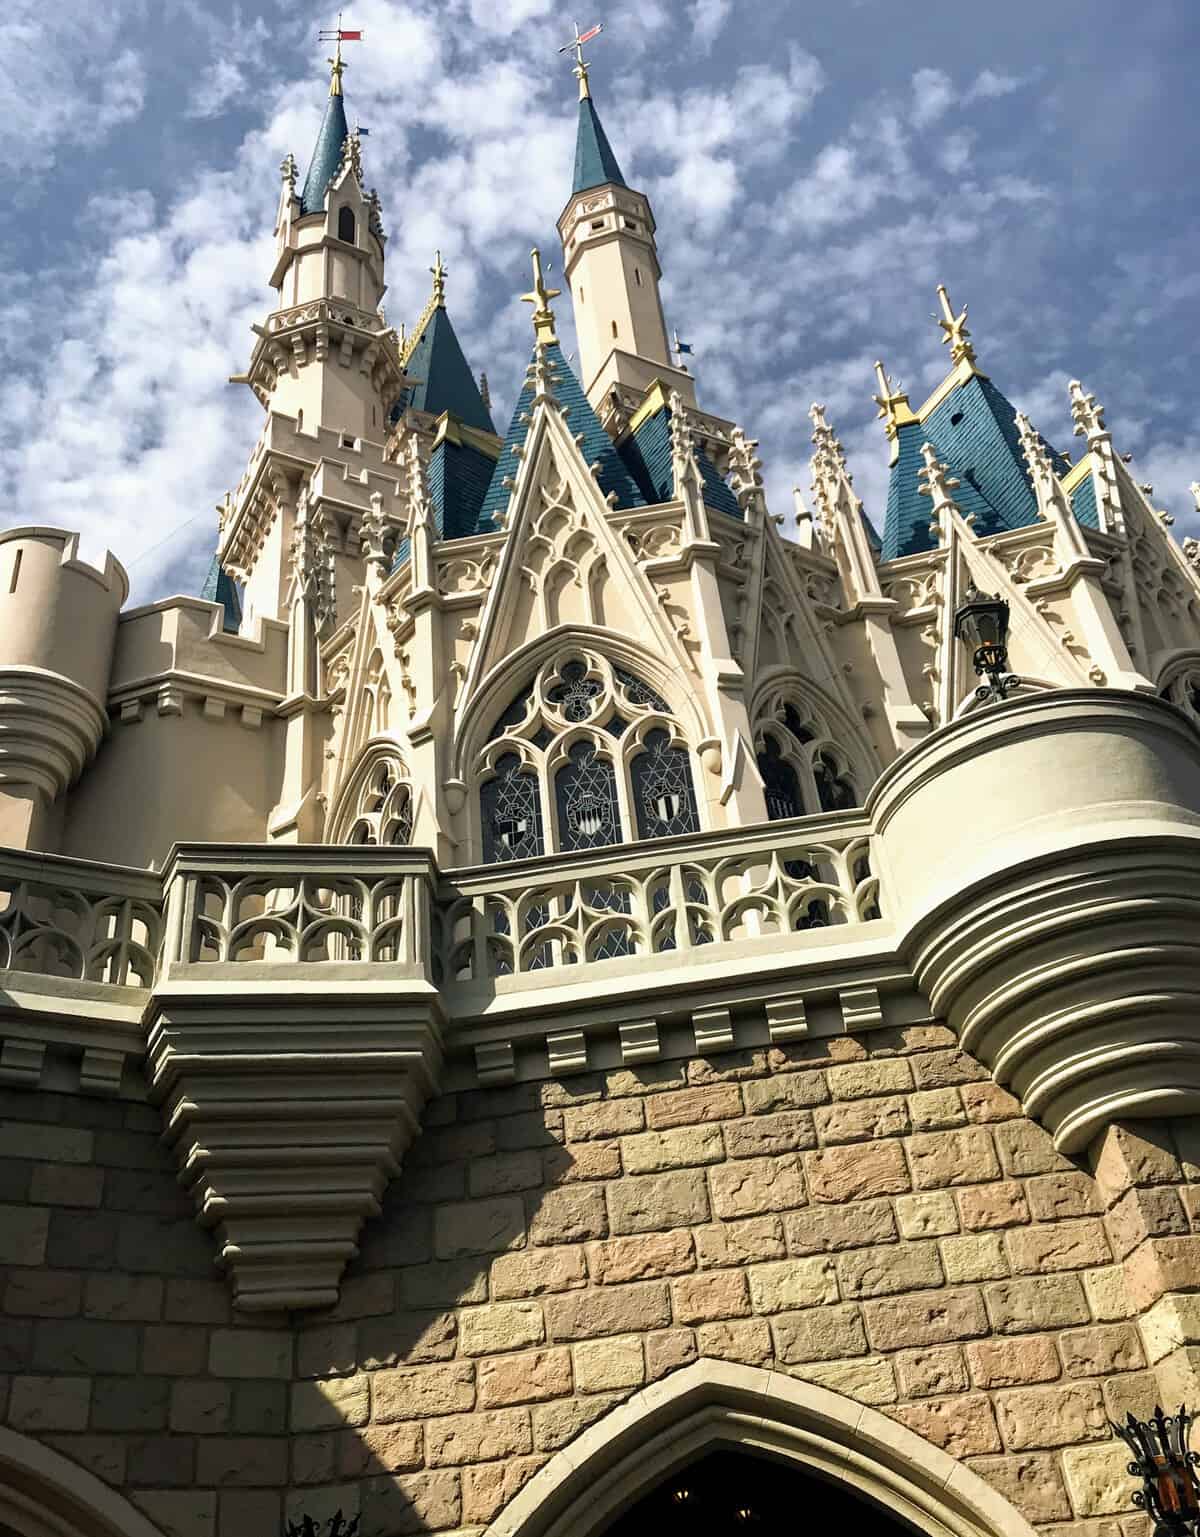 6 things to help you plan a trip to Disney World